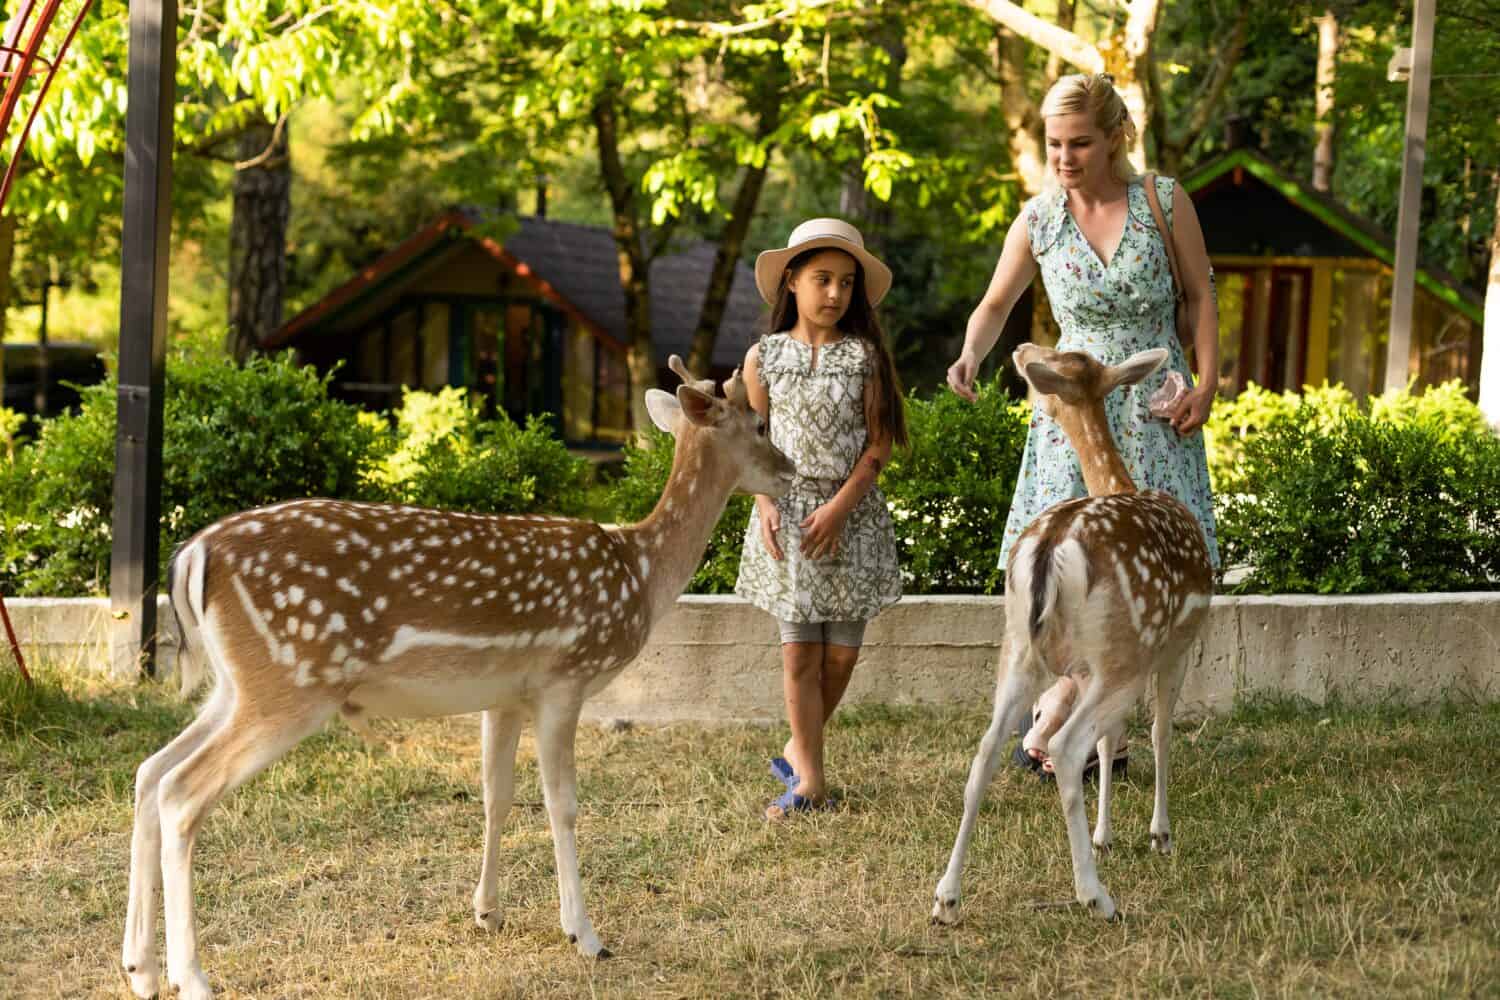 Child feeding wild deer at petting zoo. Kids feed animals at outdoor. Little girl watching reindeer on a farm. Kid and pet animal. Family summer trip to zoological garden. Herd of deers.